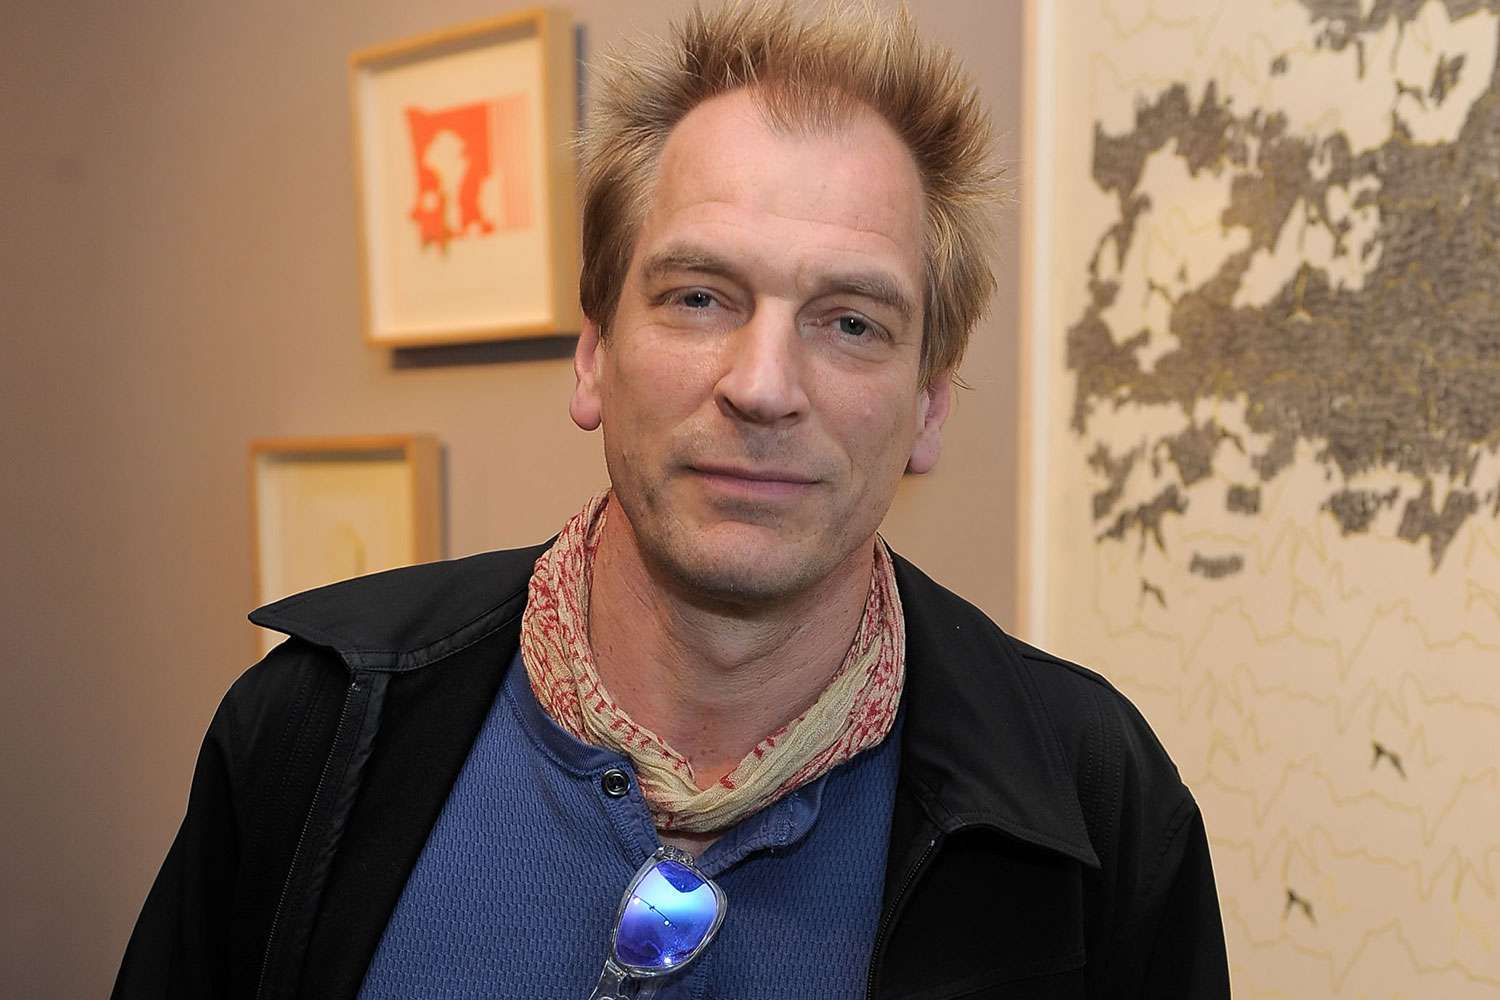 Hikers discover human remains, Julian Sands